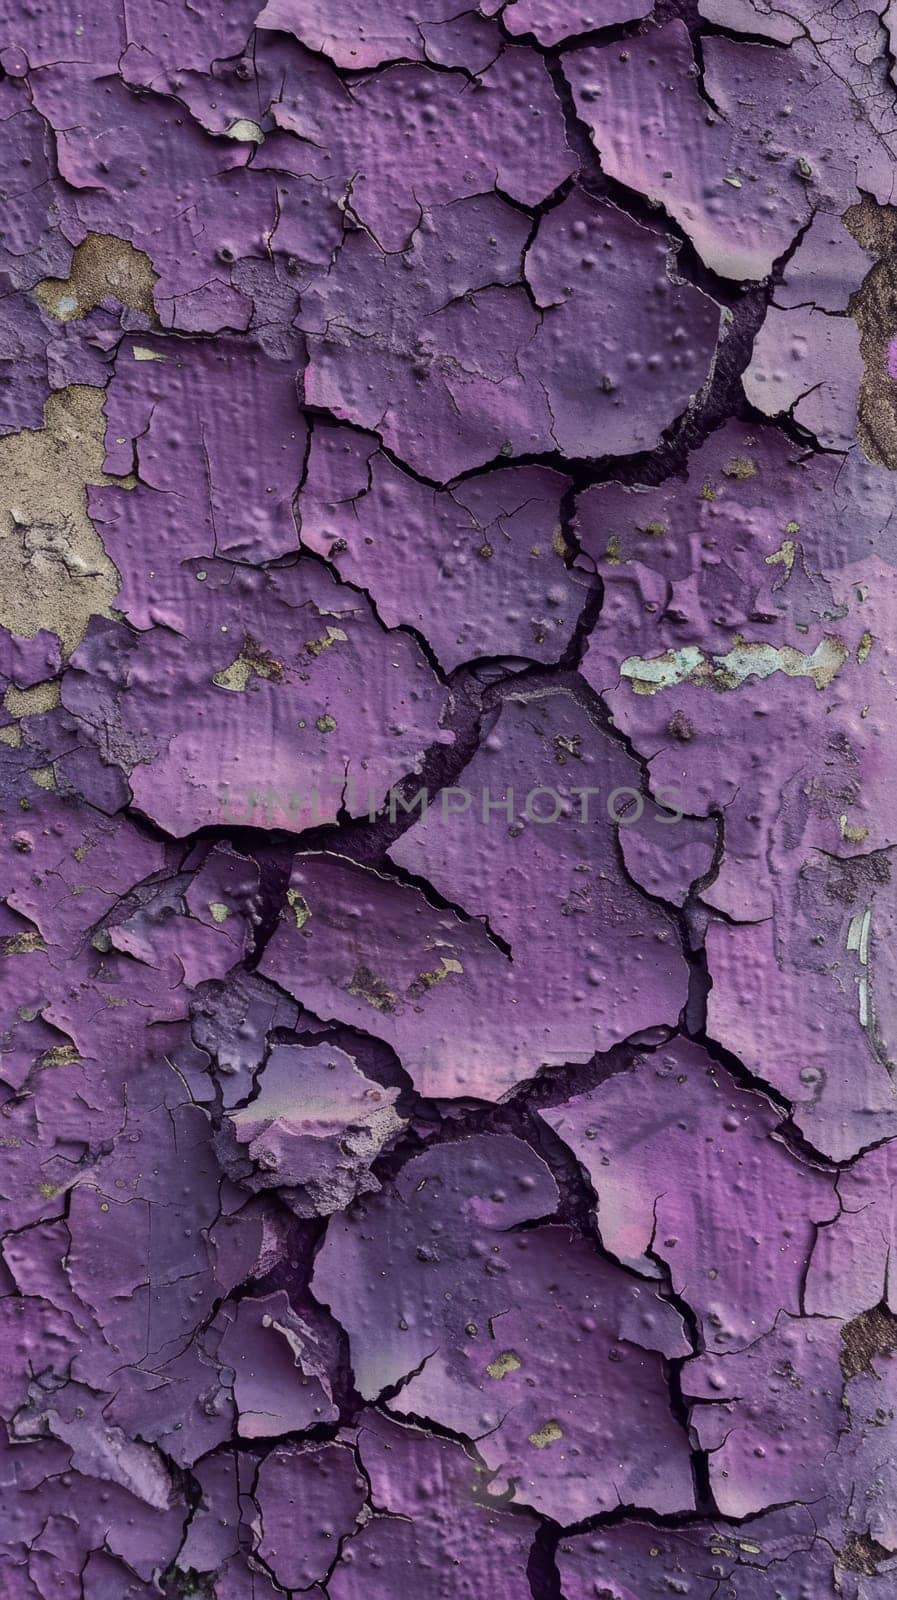 A vibrant purple surface shows a complex network of cracks and chips. The texture highlights the beauty of decay and the passage of time